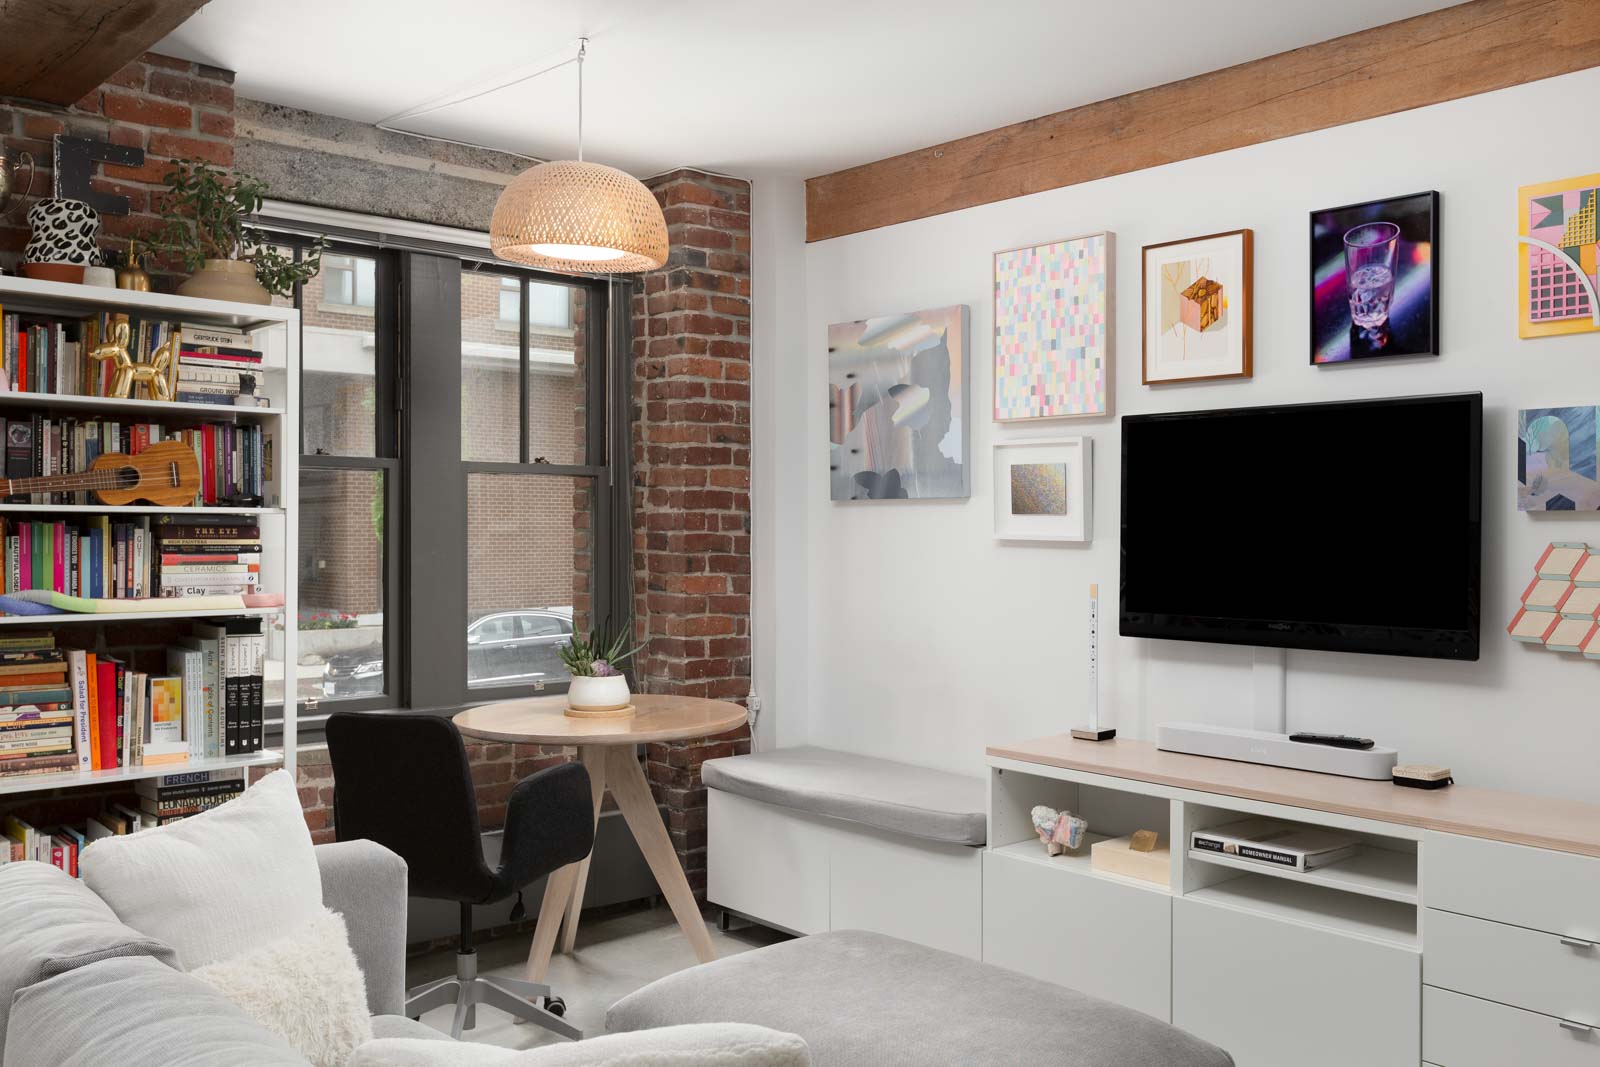 Cozy living space with a coffee nook by the floor-to-ceiling windows and authentic exposed brick in a rental condo provided by Birds Nest Properties in Vancouver